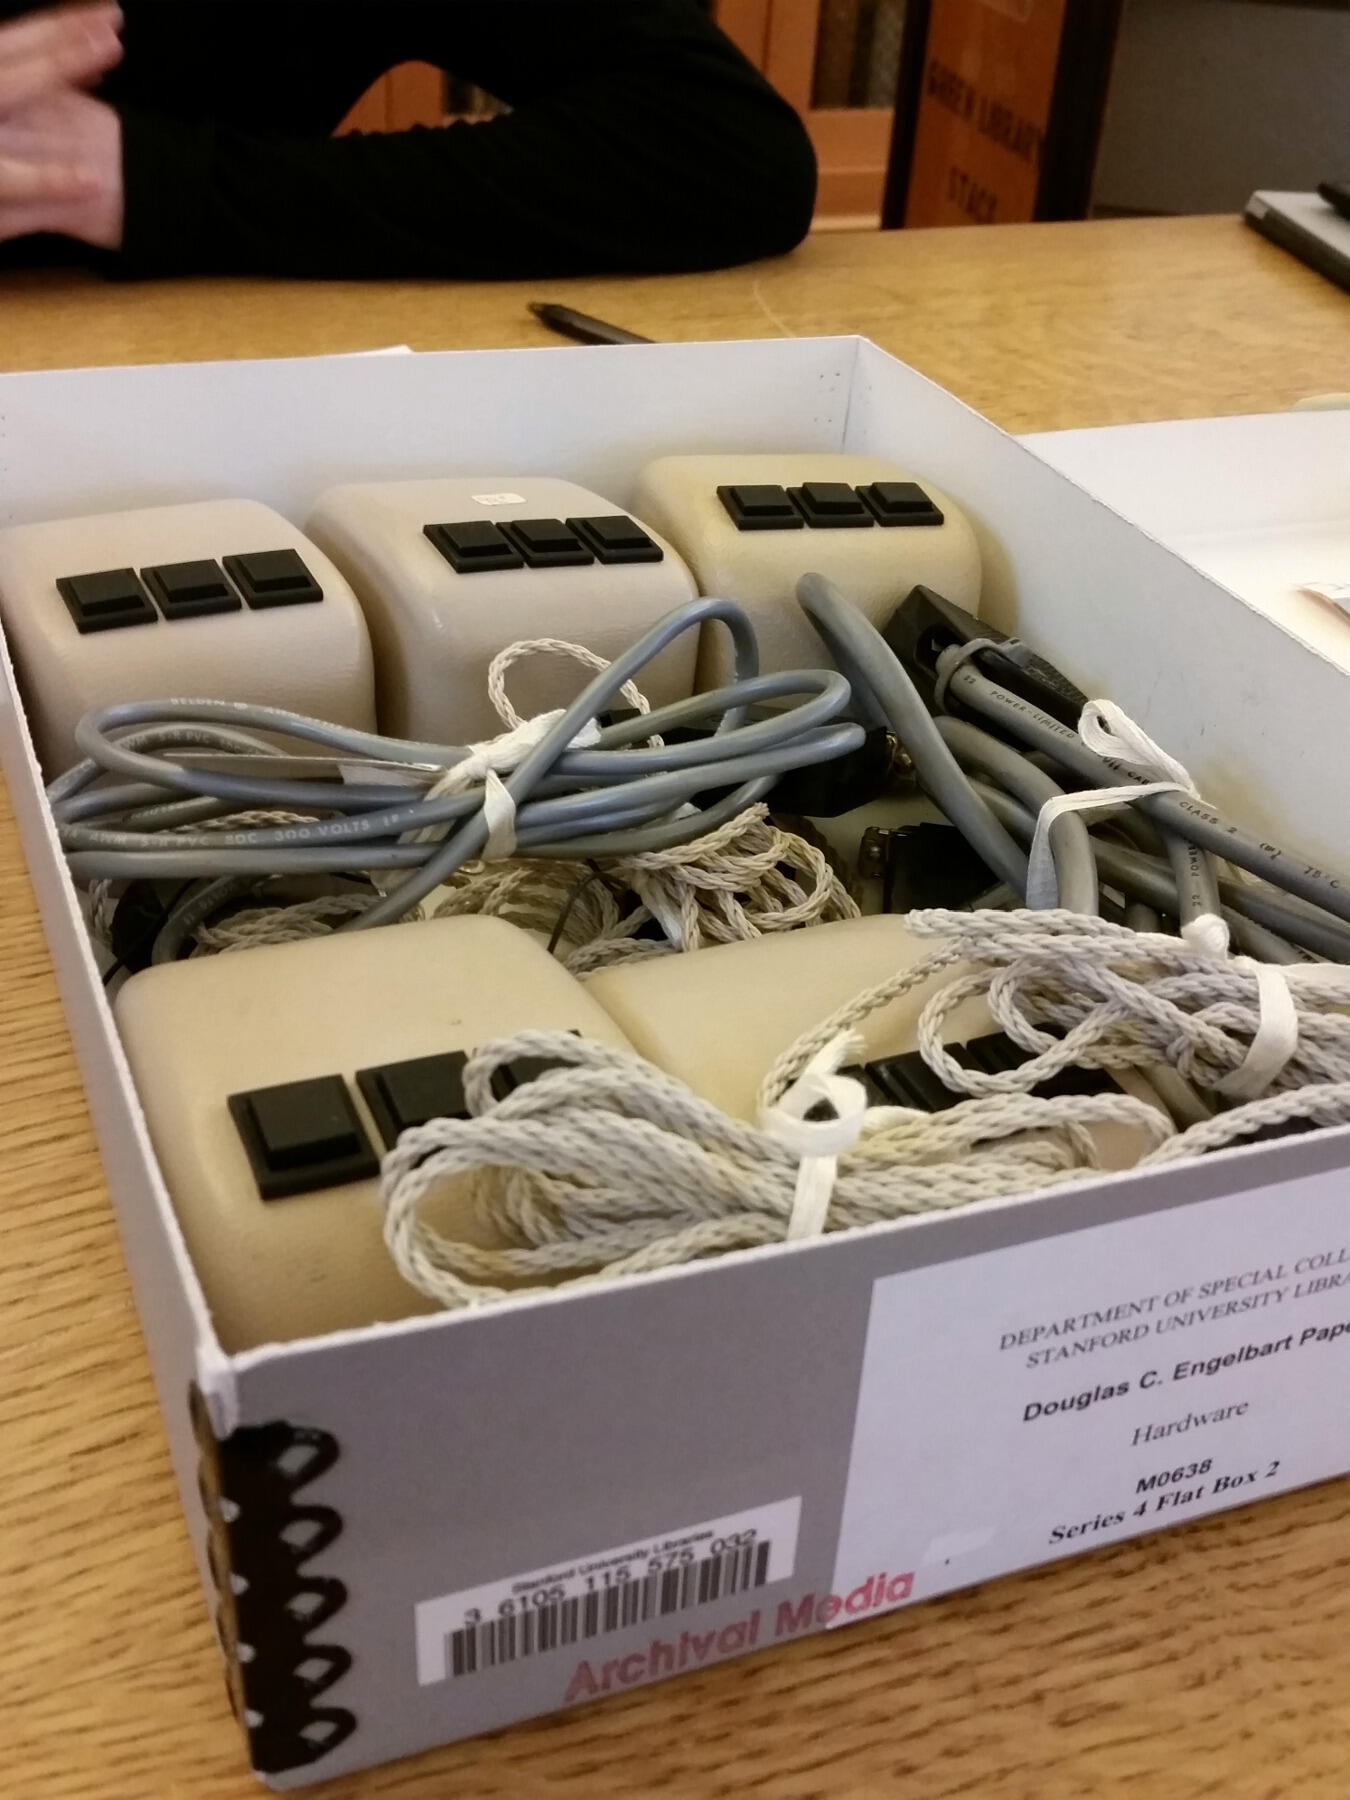 A box of early computer mice.